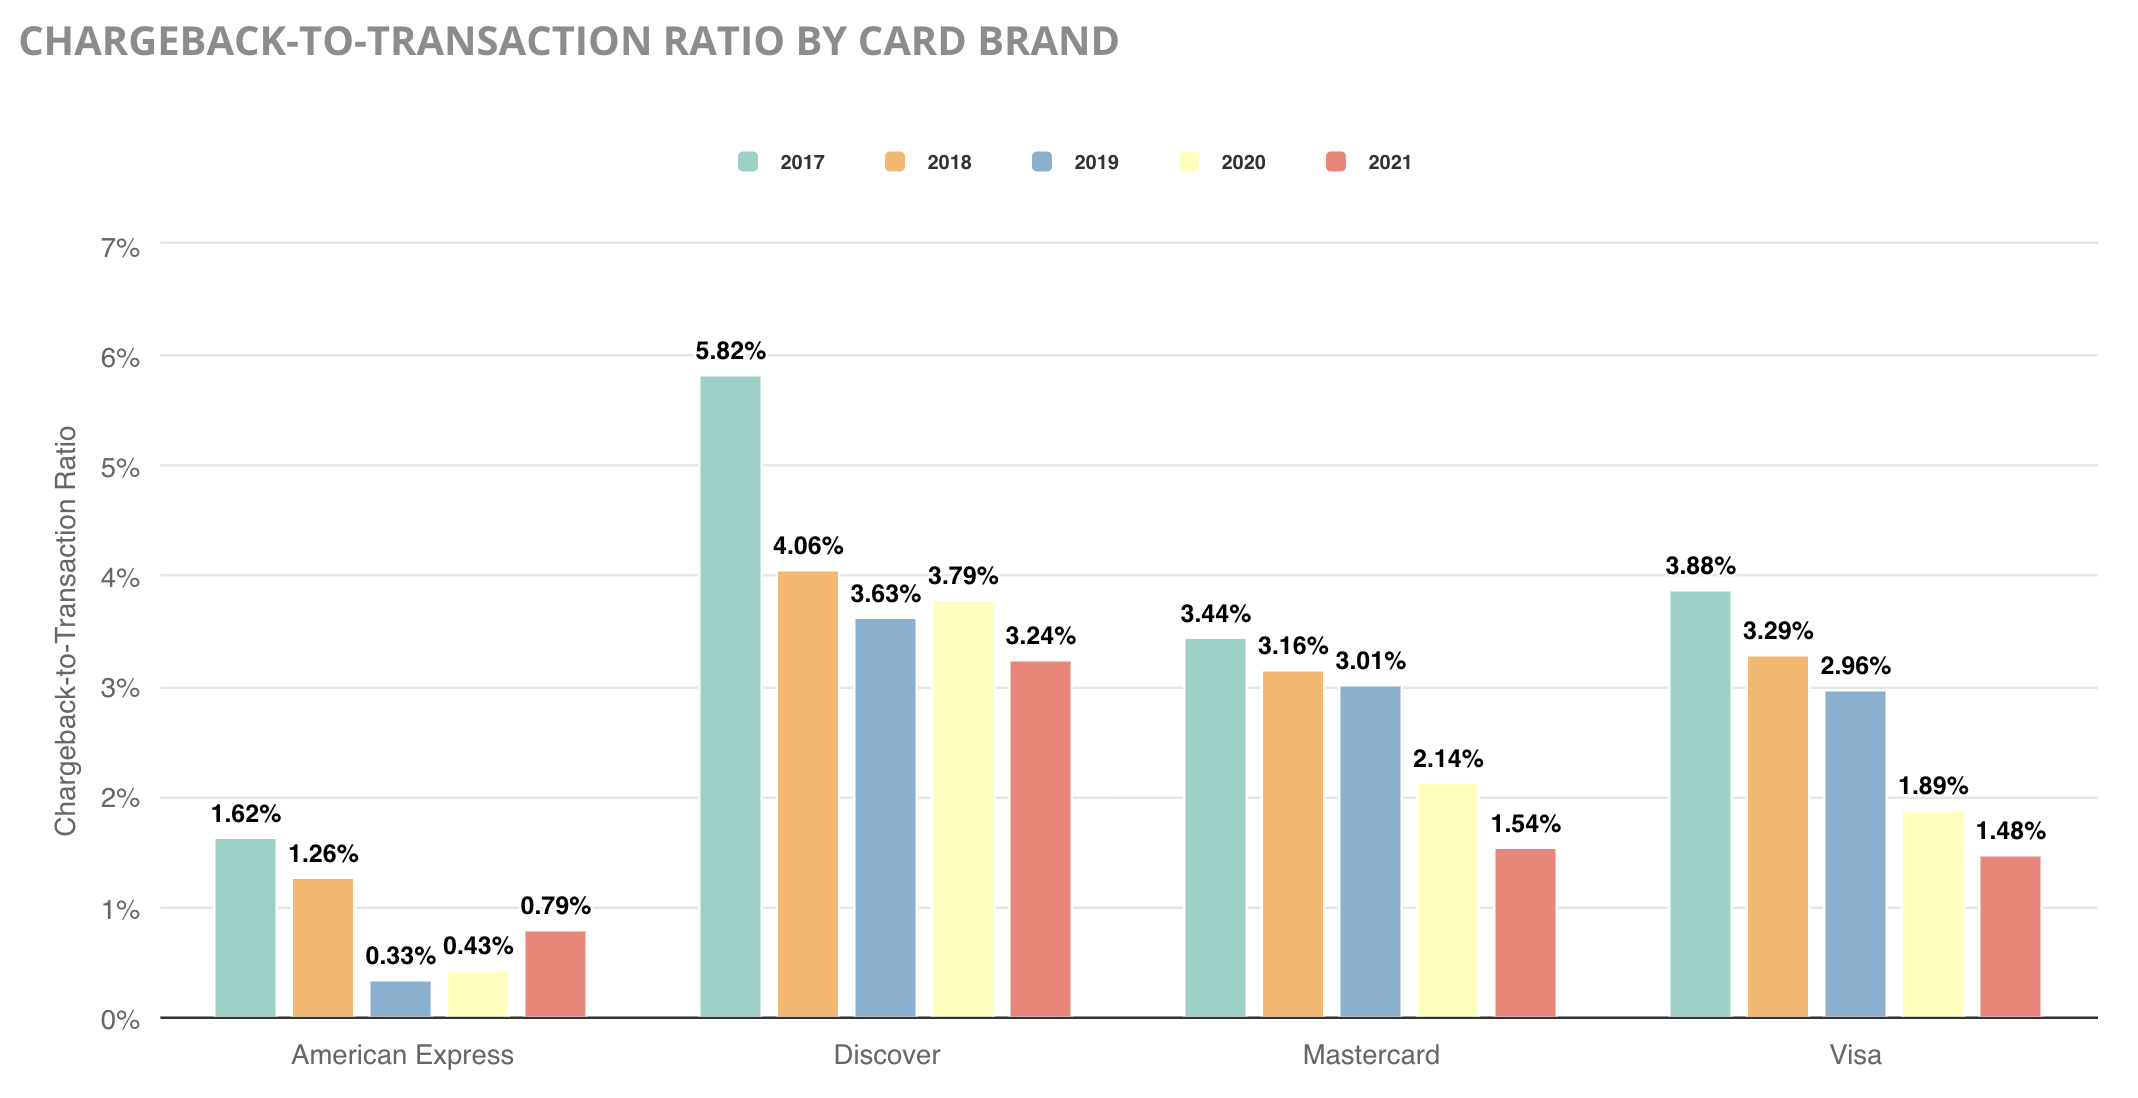 Chargeback-to-transaction ratio by brand